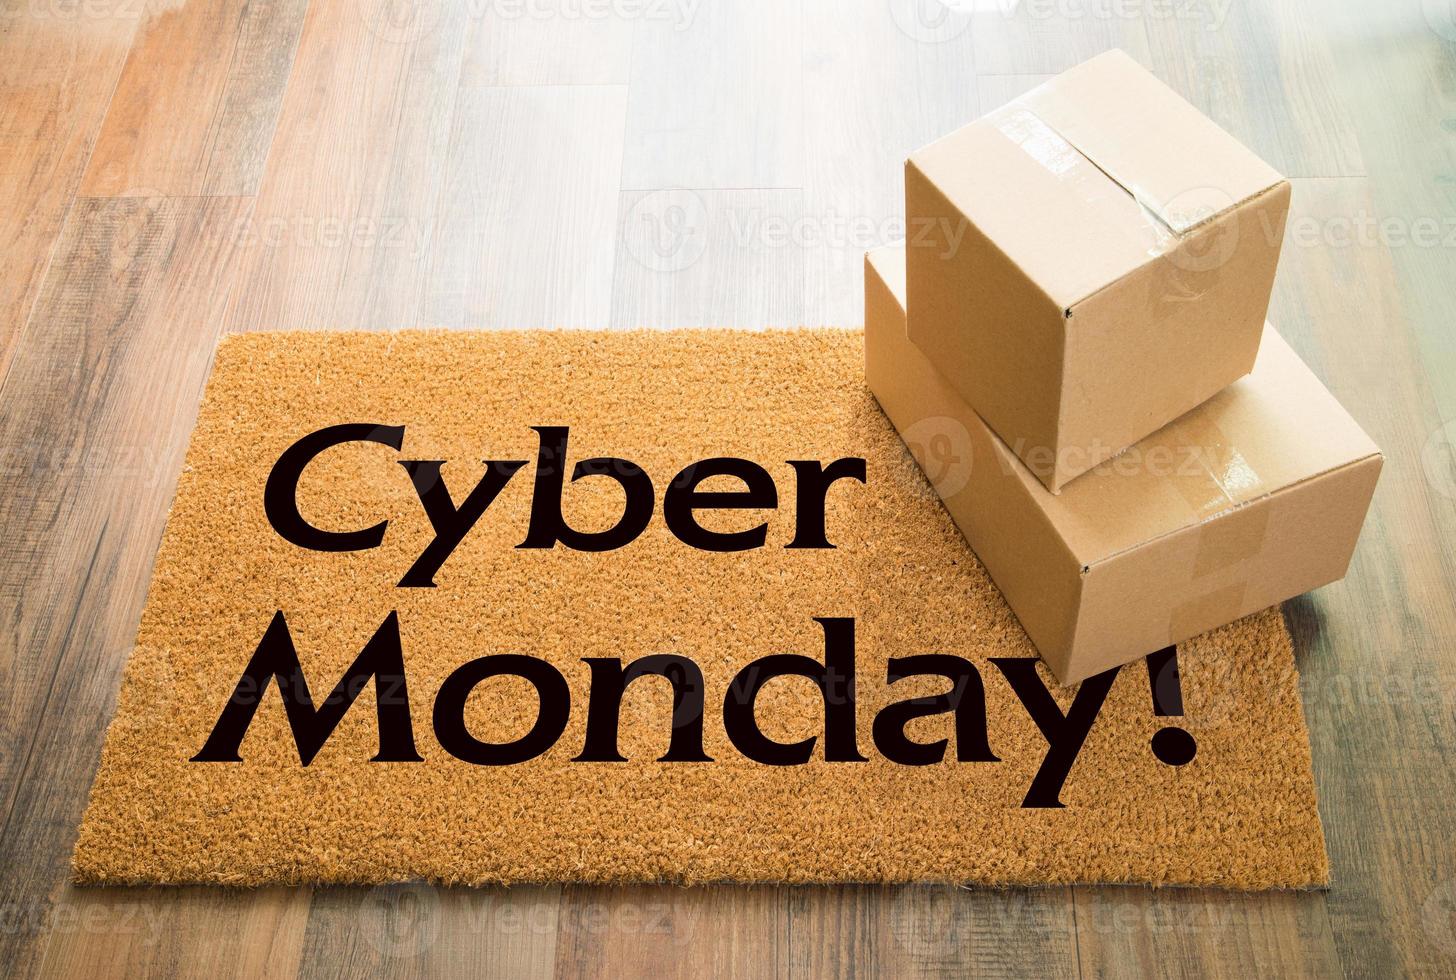 Cyber Monday Welcome Mat On Wood Floor With Shipment of Boxes photo